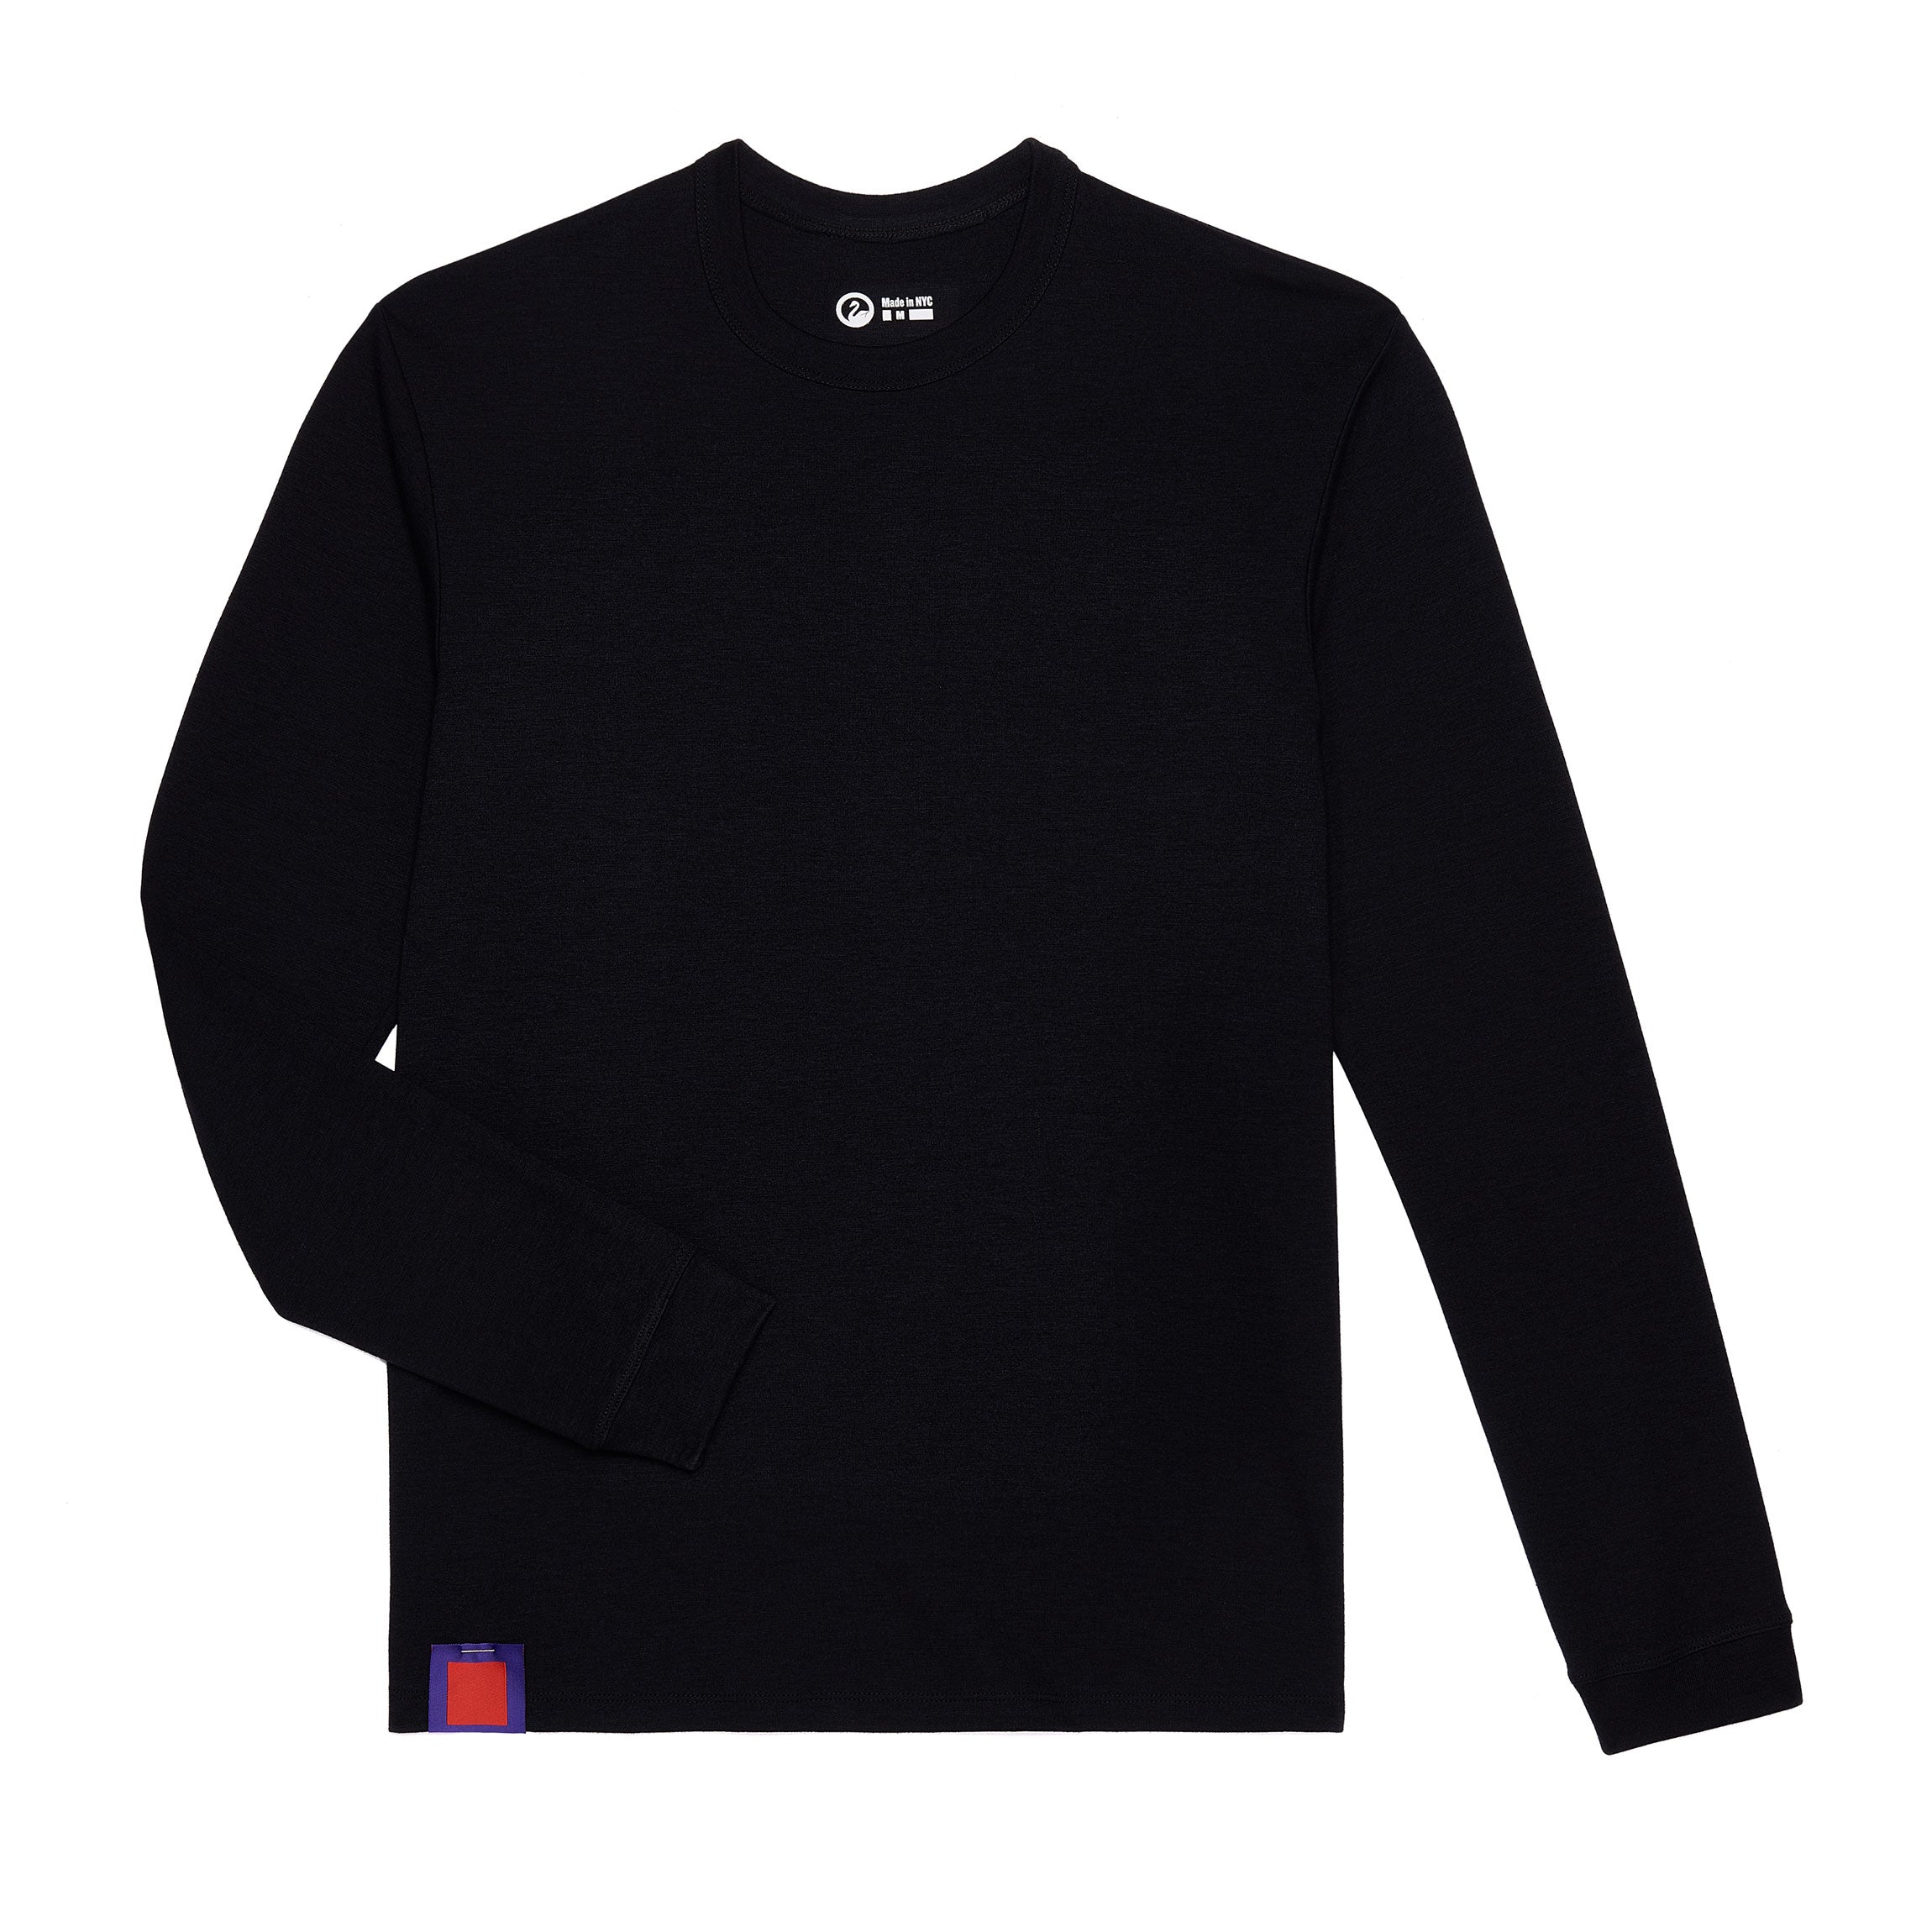 Outlier - 353 - OUTLIER Cottomerino Longsleeve – Experiment